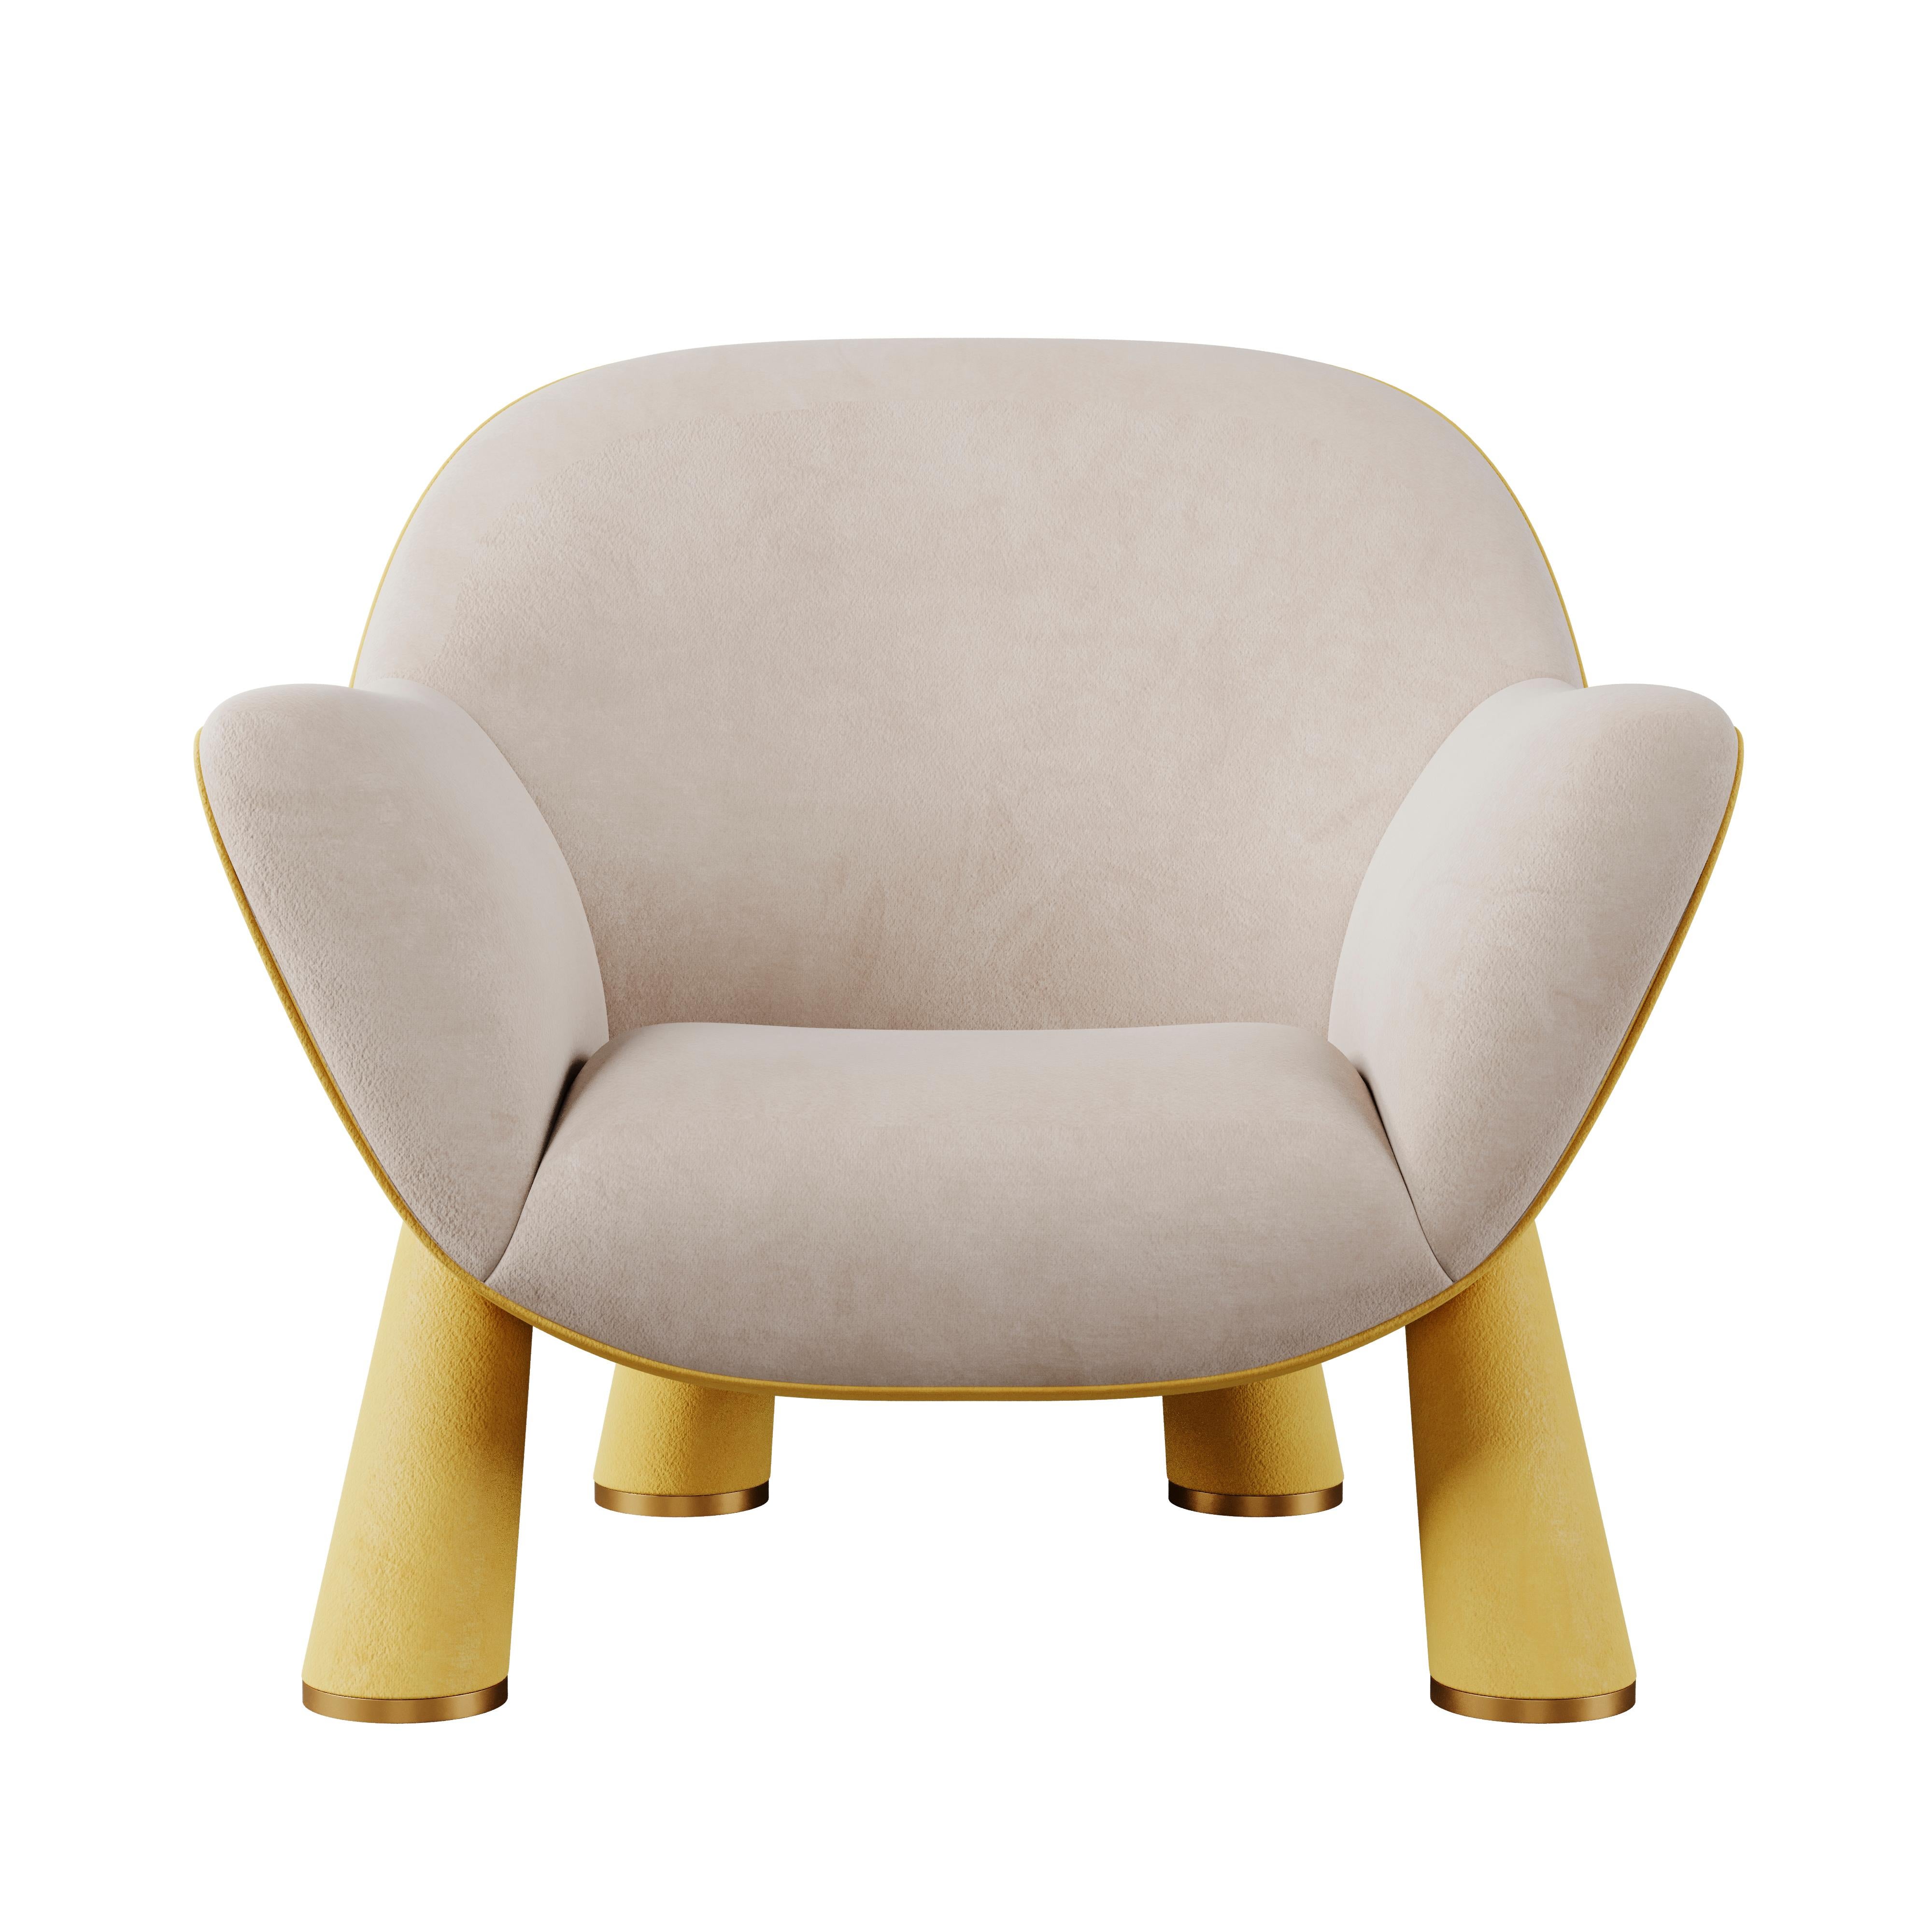 Portuguese Mid-Century Modern Lucy Armchair Walnut Wood Polished Brass Cotton Velvet For Sale